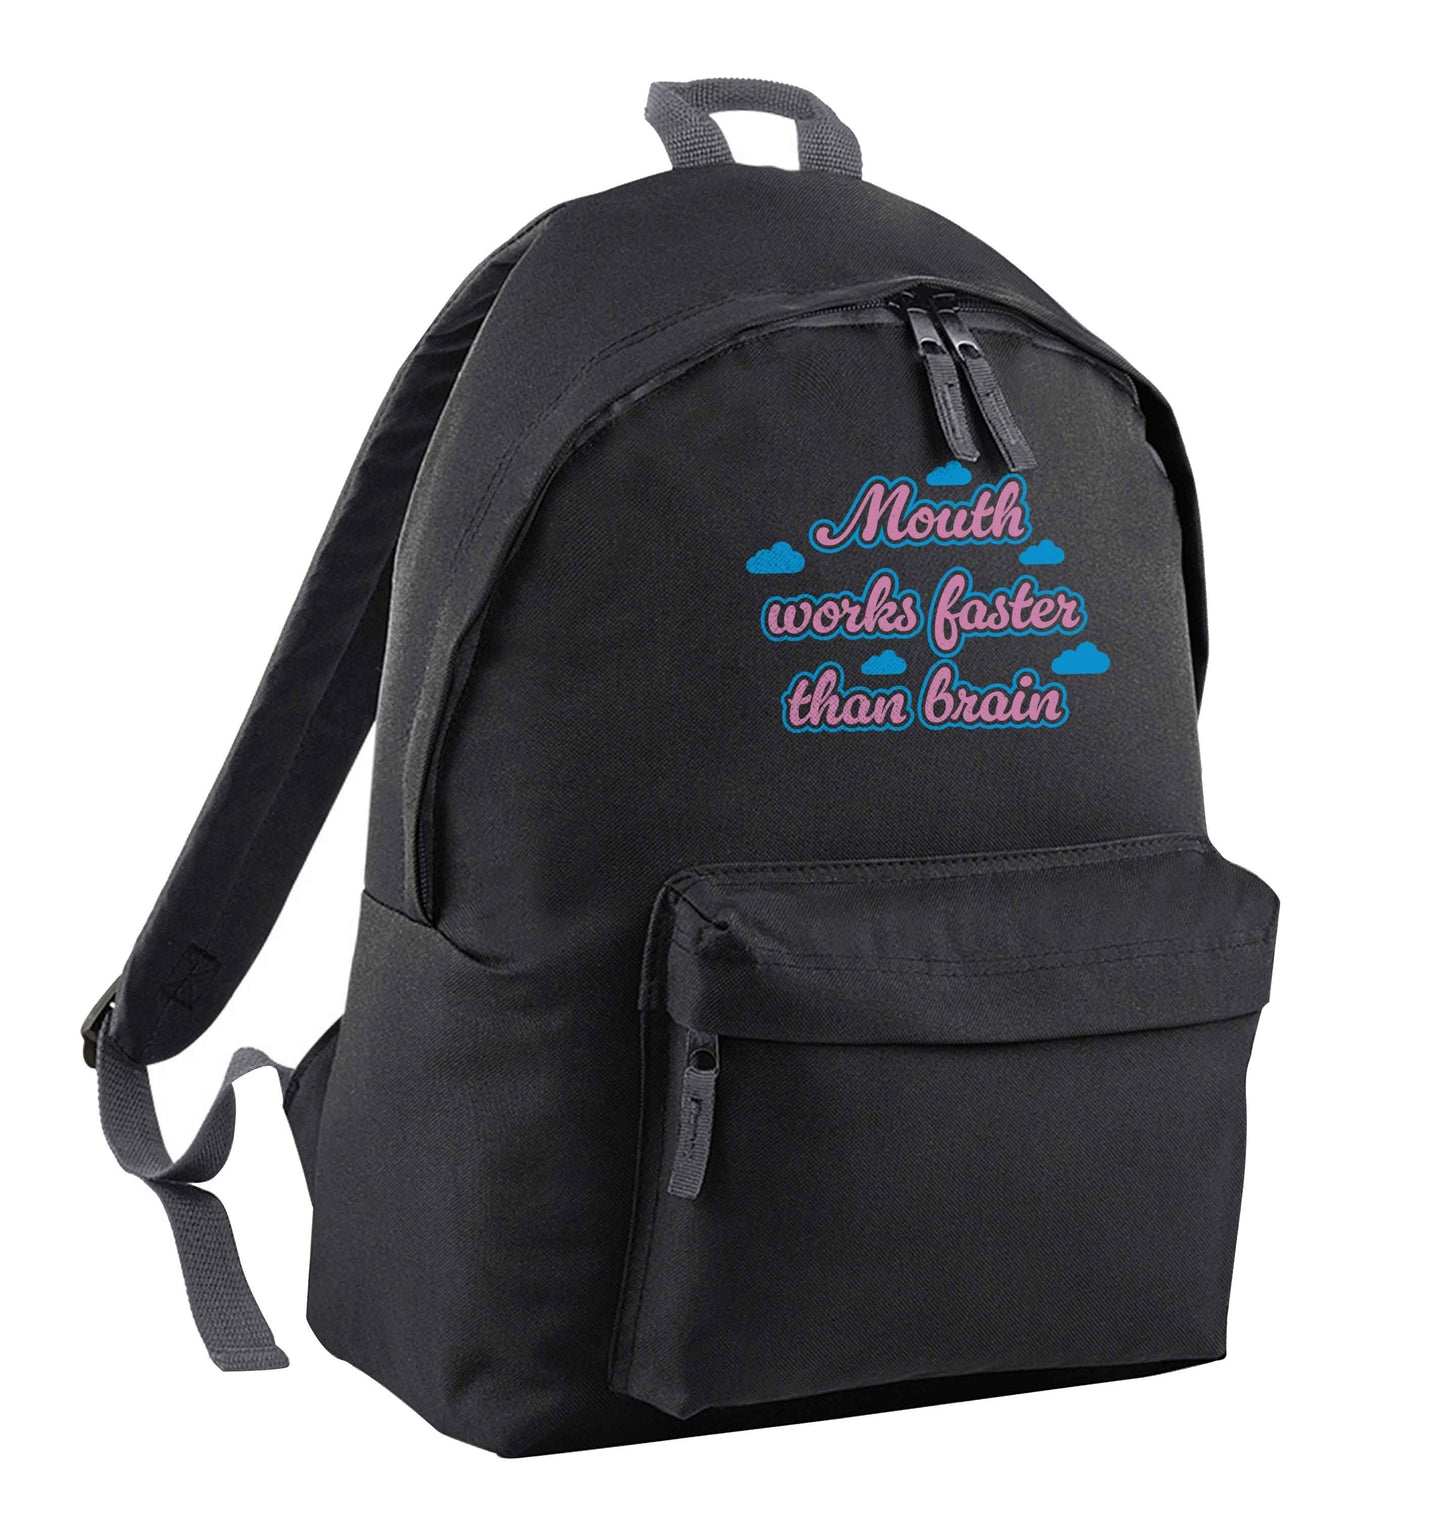 Mouth works faster than brain black adults backpack